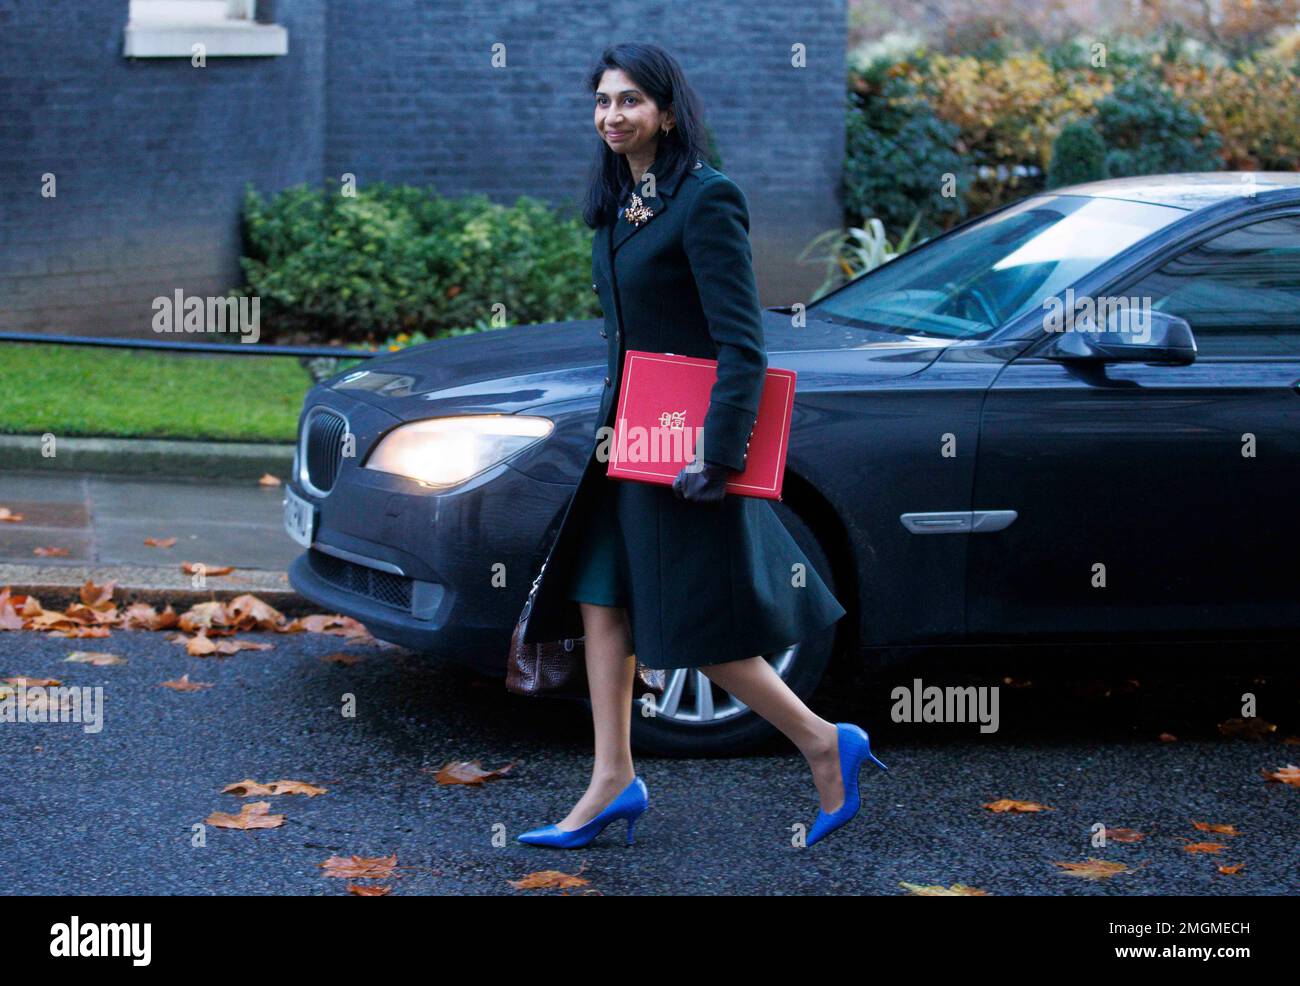 Suella Braverman, Home Secretary, in Downing street. She has been addressing the problem of migrants crossing the Channel. Stock Photo